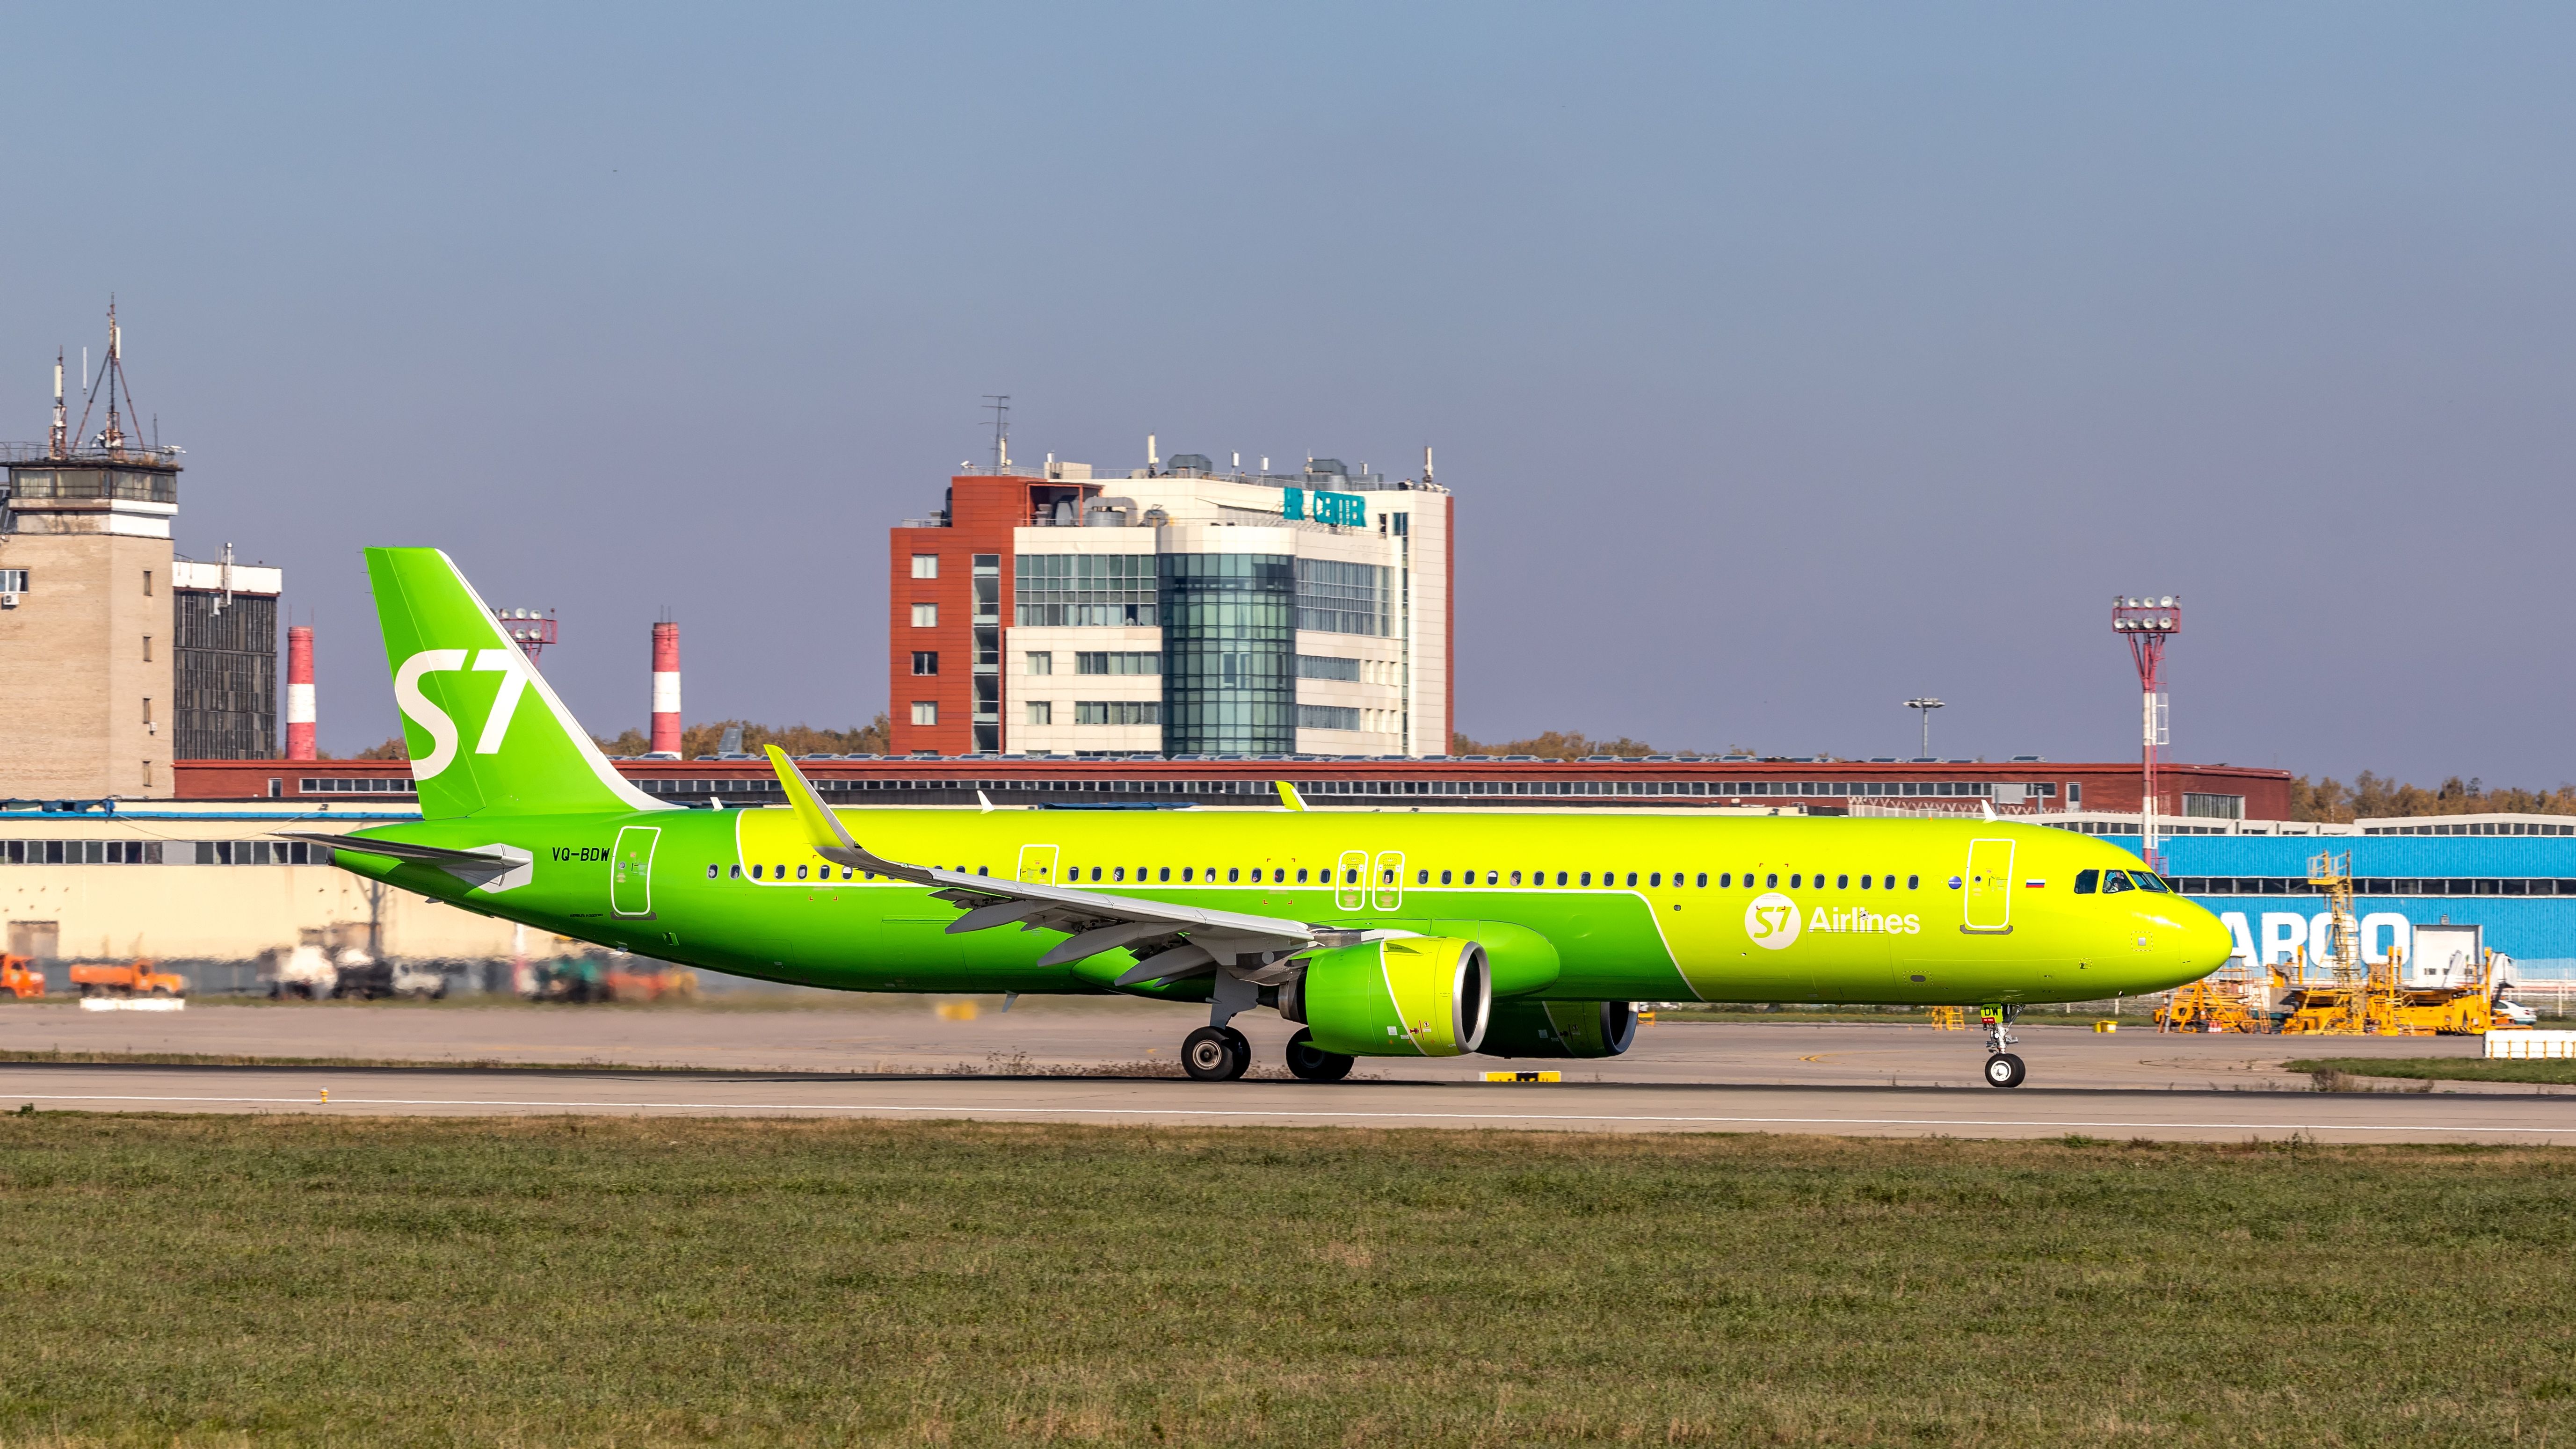 Airbus A321neo belonging to S7